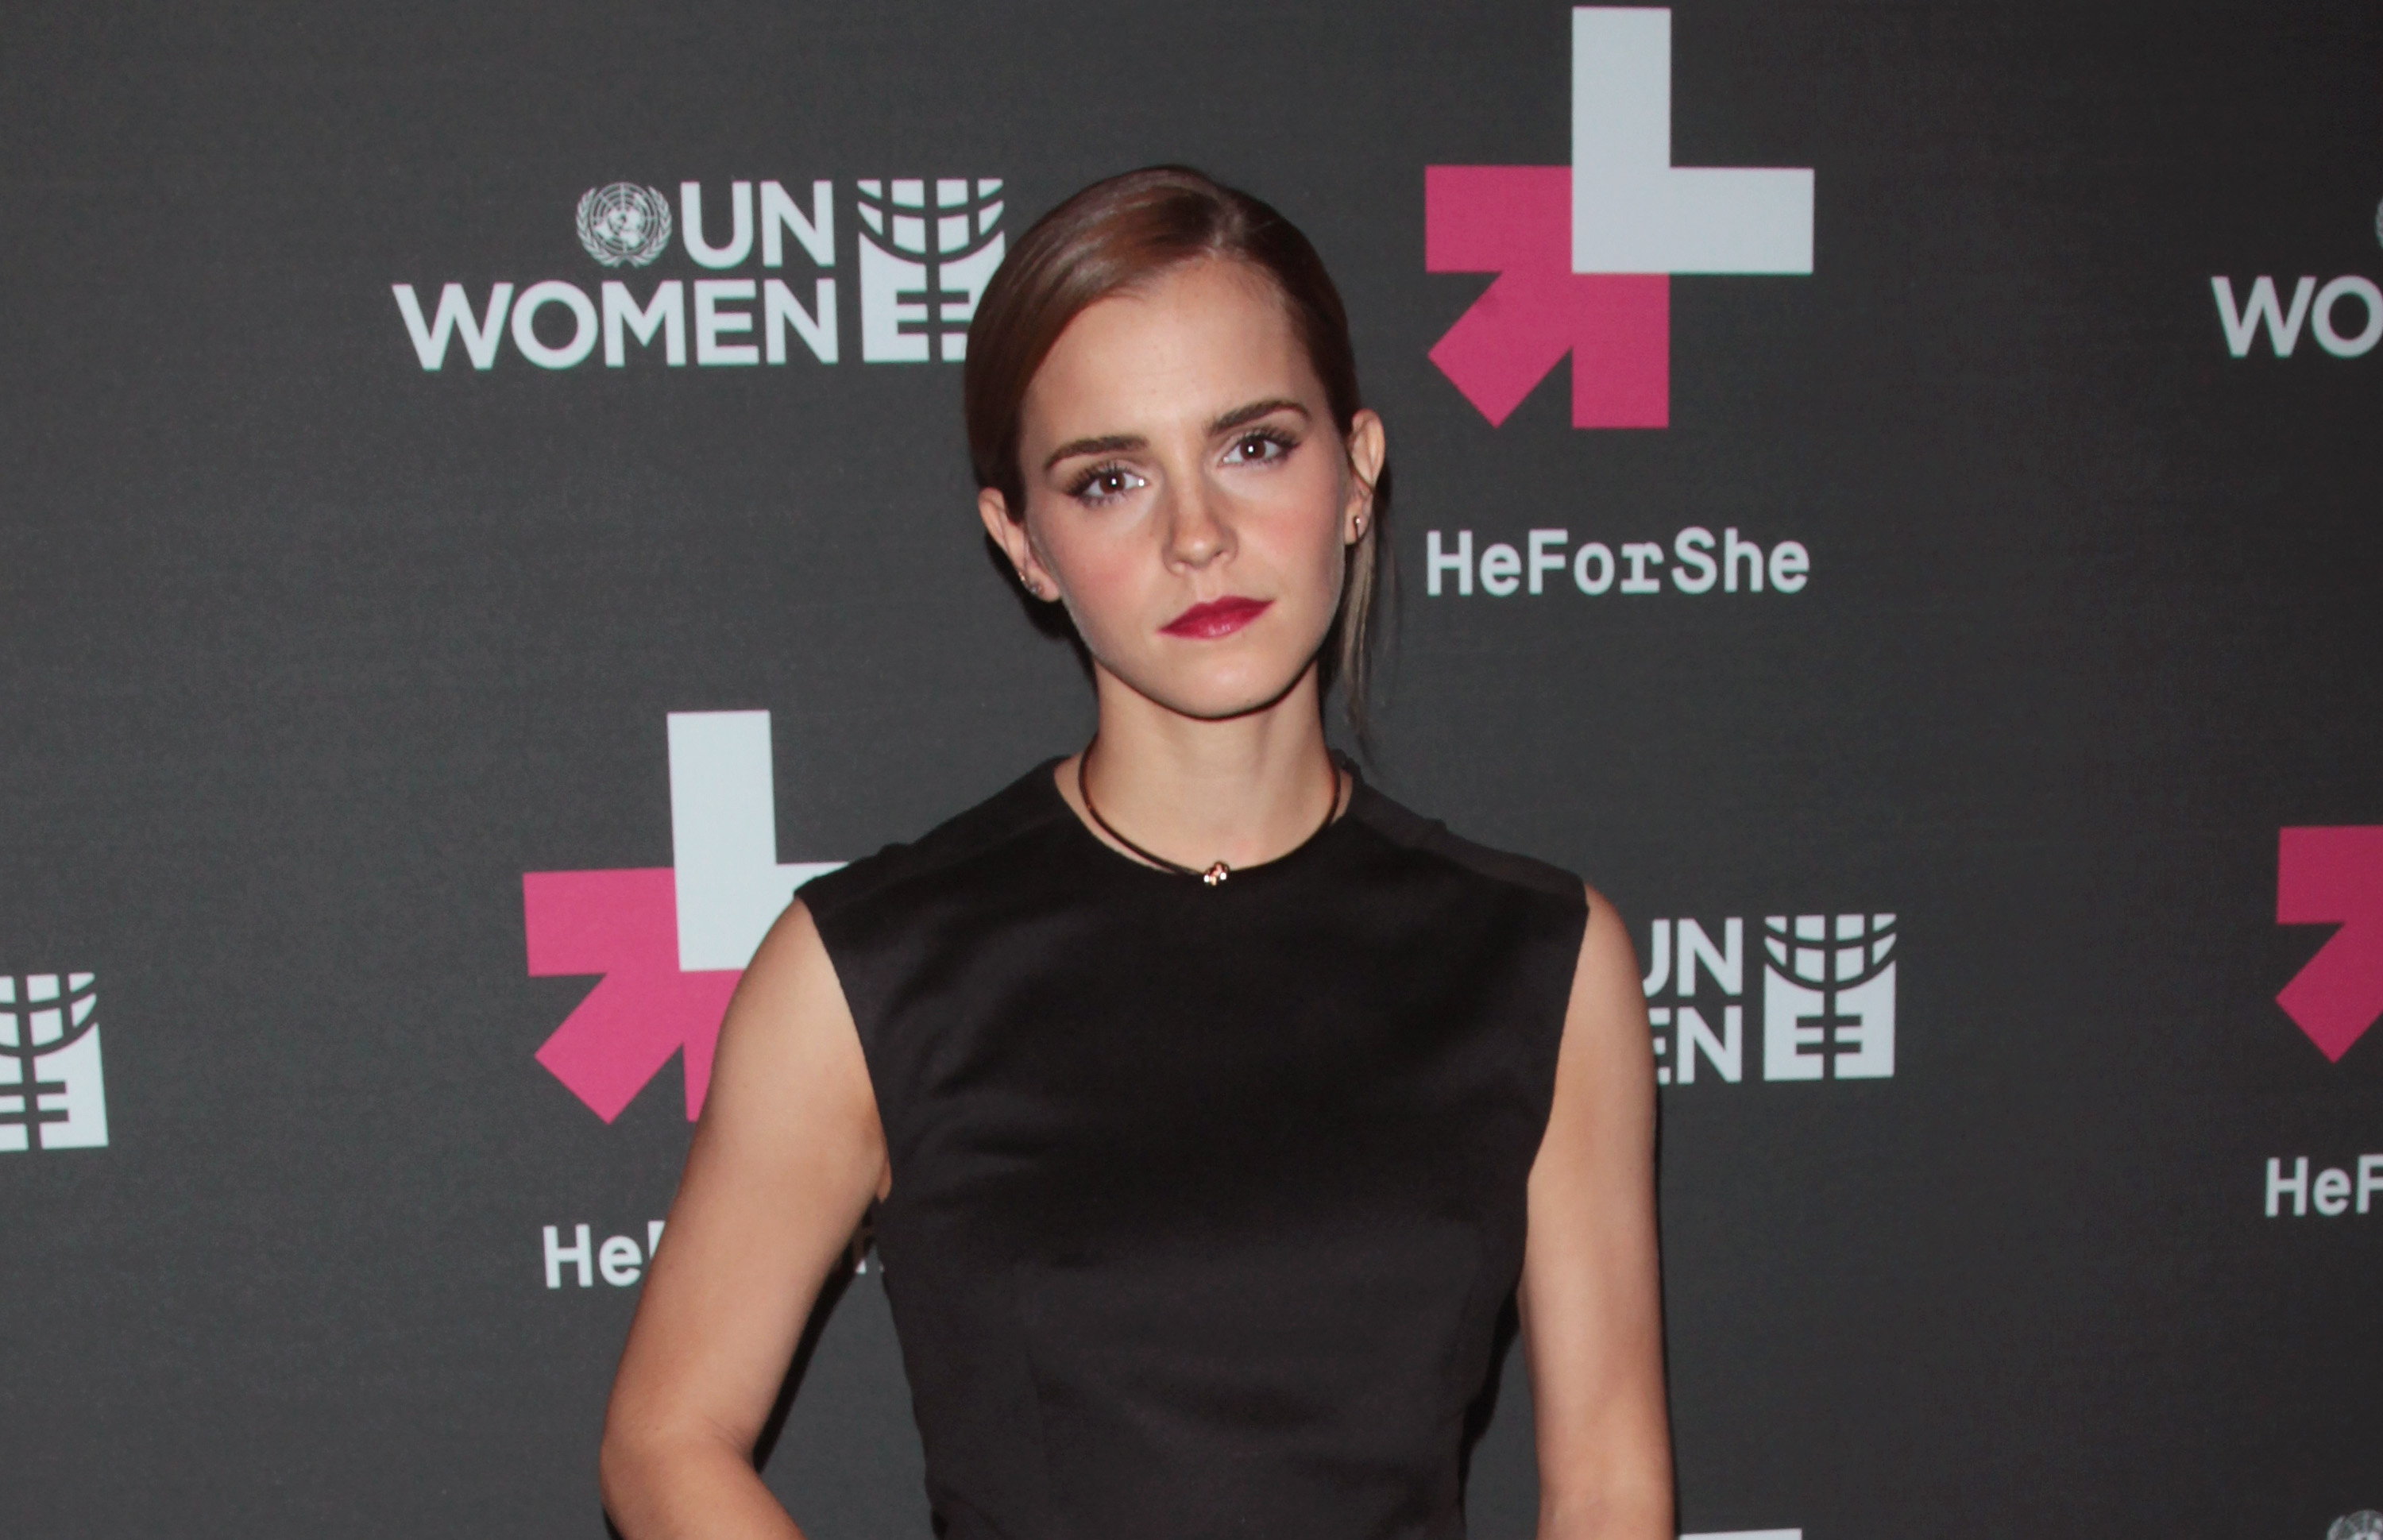 Actress Emma Watson attends the UN Women's "HeForShe" VIP After Party at The Peninsula Hotel on September 20, 2014 in New York City.  ( Jim Spellman/WireImage) (Jim Spellman&mdash;WireImage)